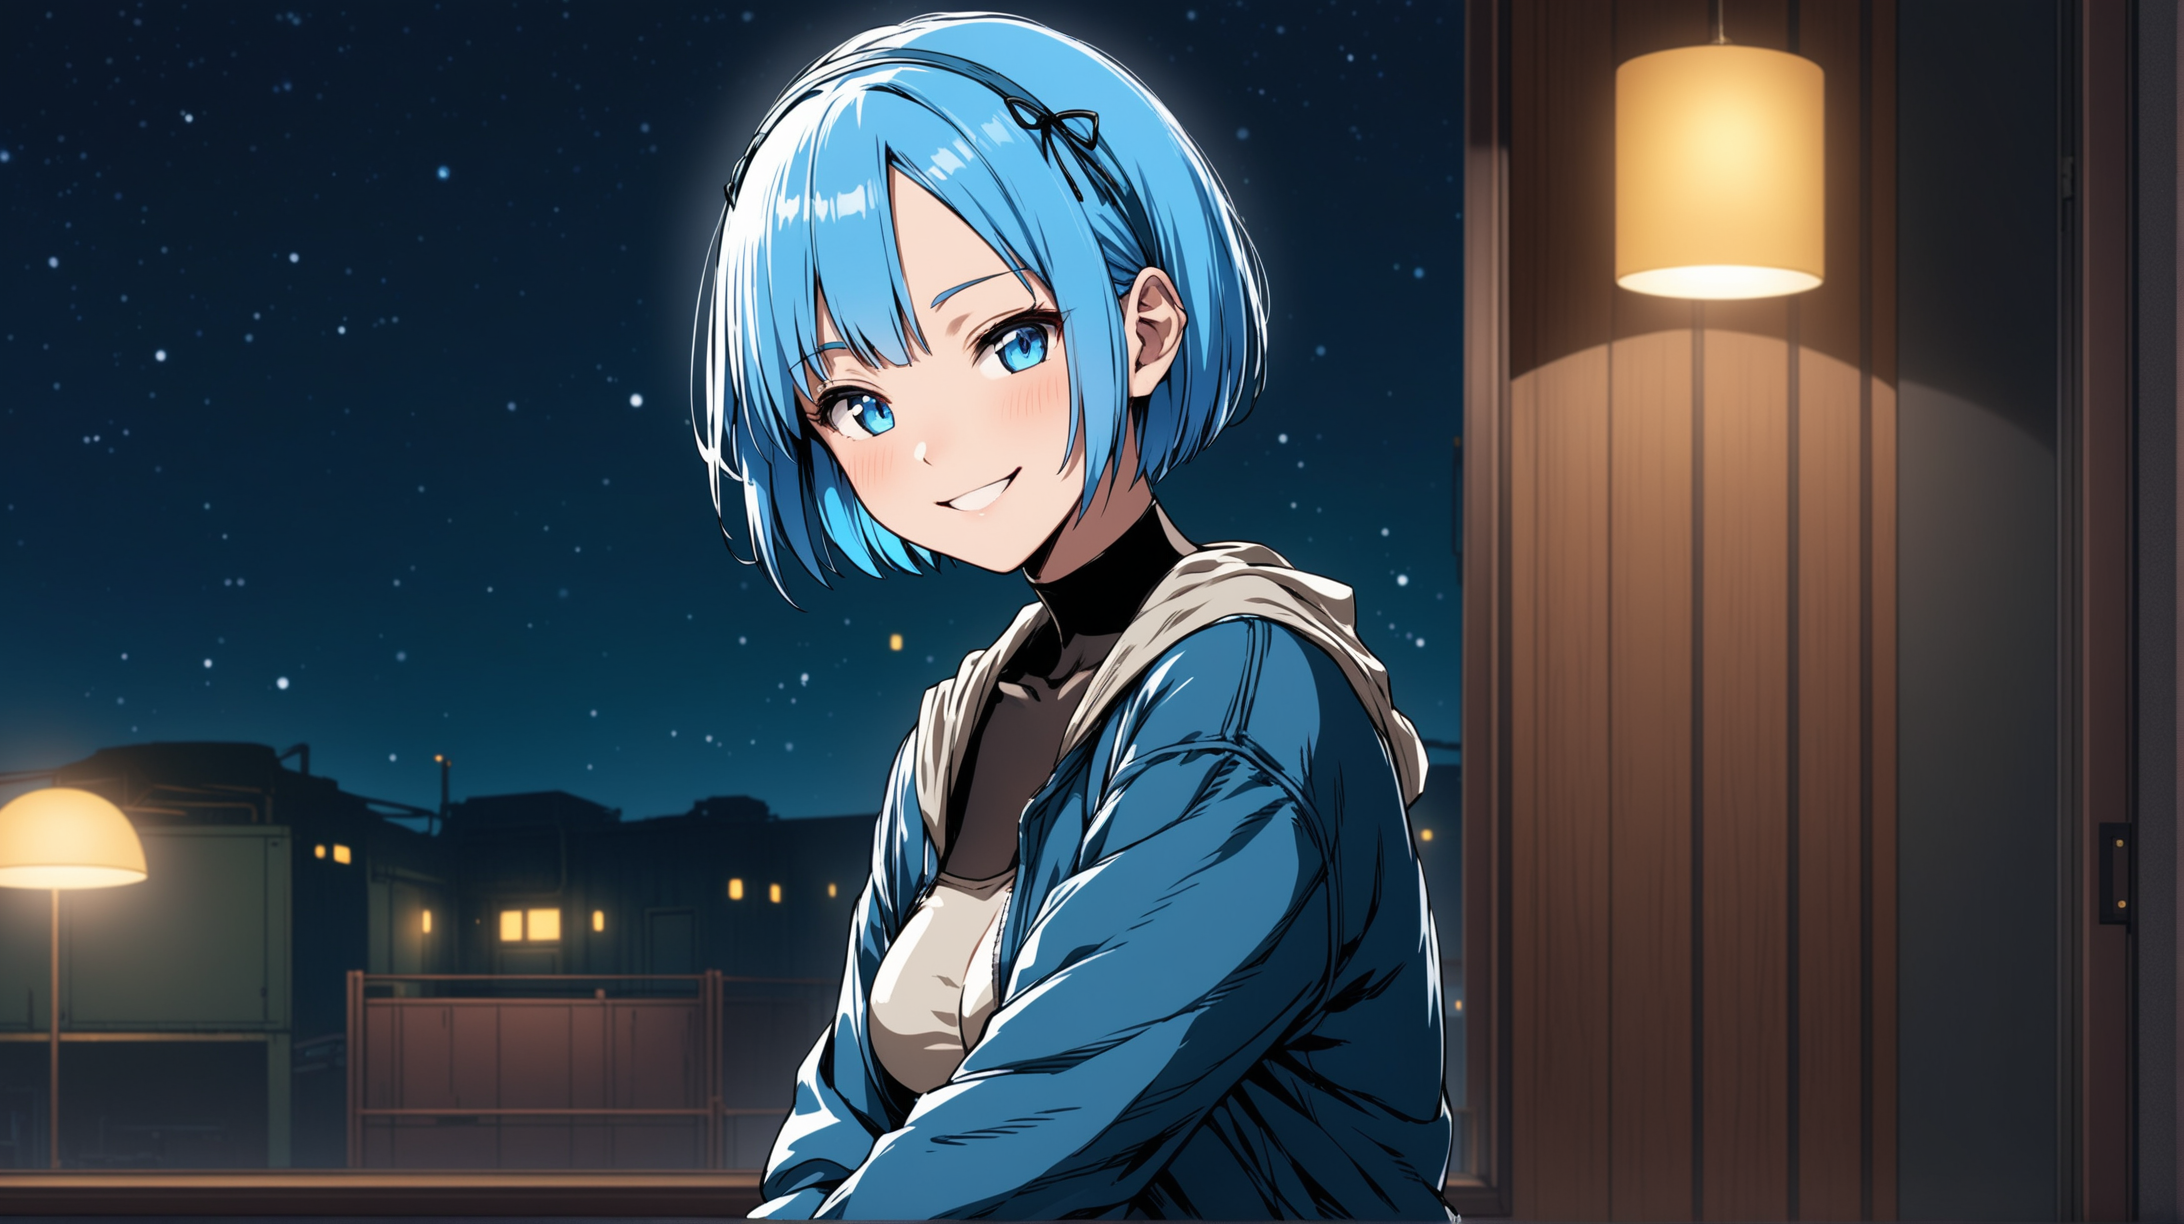 Draw the character Rem, high quality, in a relaxed pose, indoors, at night, wearing an outfit inspired from the Fallout series, smiling with a satisfied look on her face